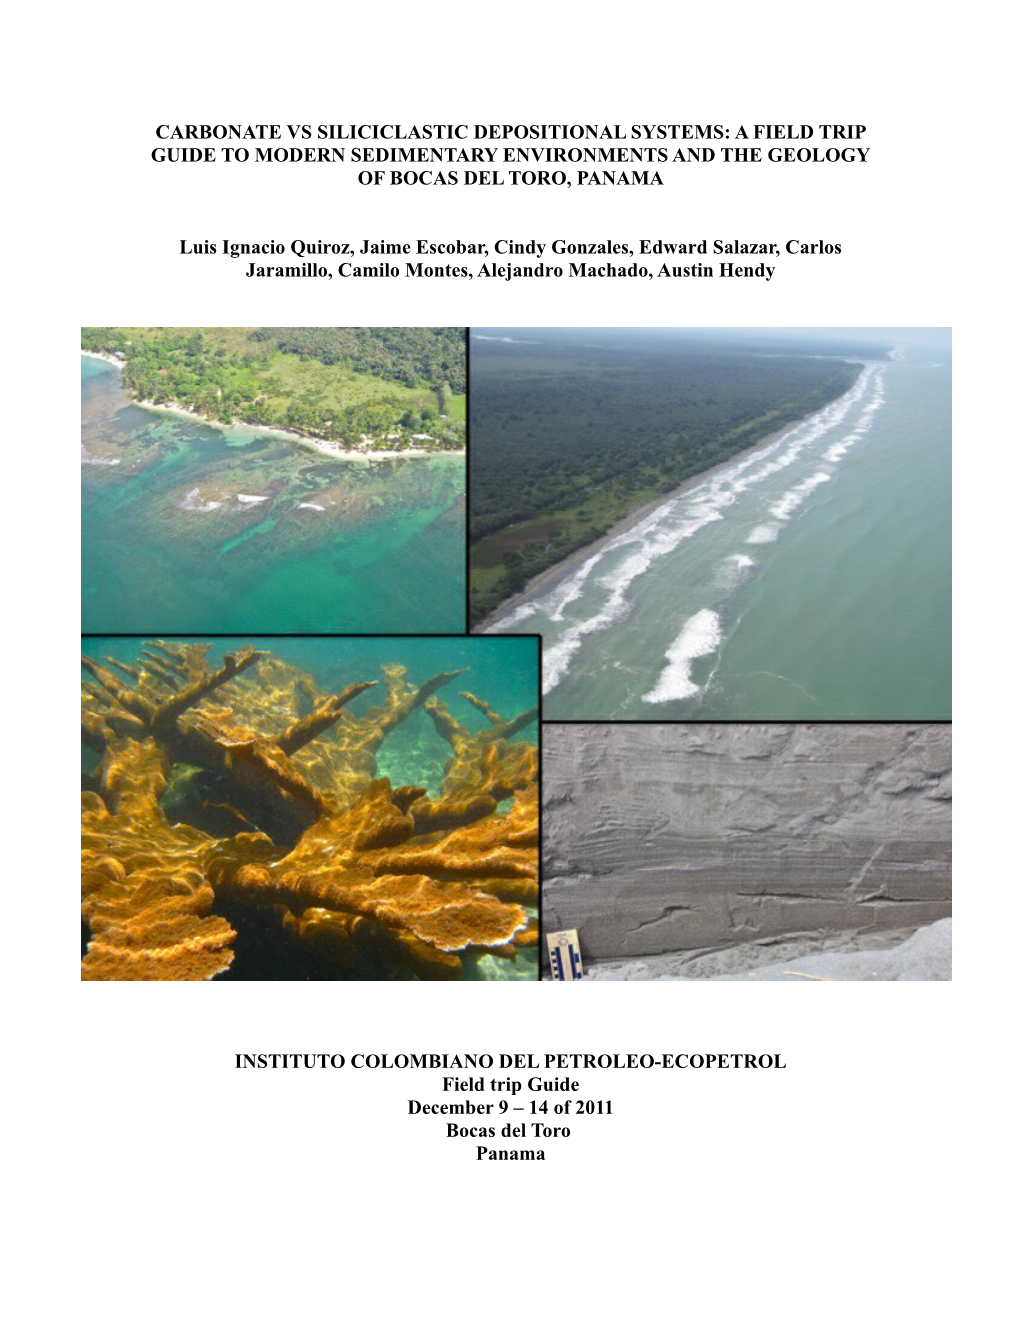 Carbonate Vs Siliciclastic Depositional Systems: a Field Trip Guide to Modern Sedimentary Environments and the Geology of Bocas Del Toro, Panama